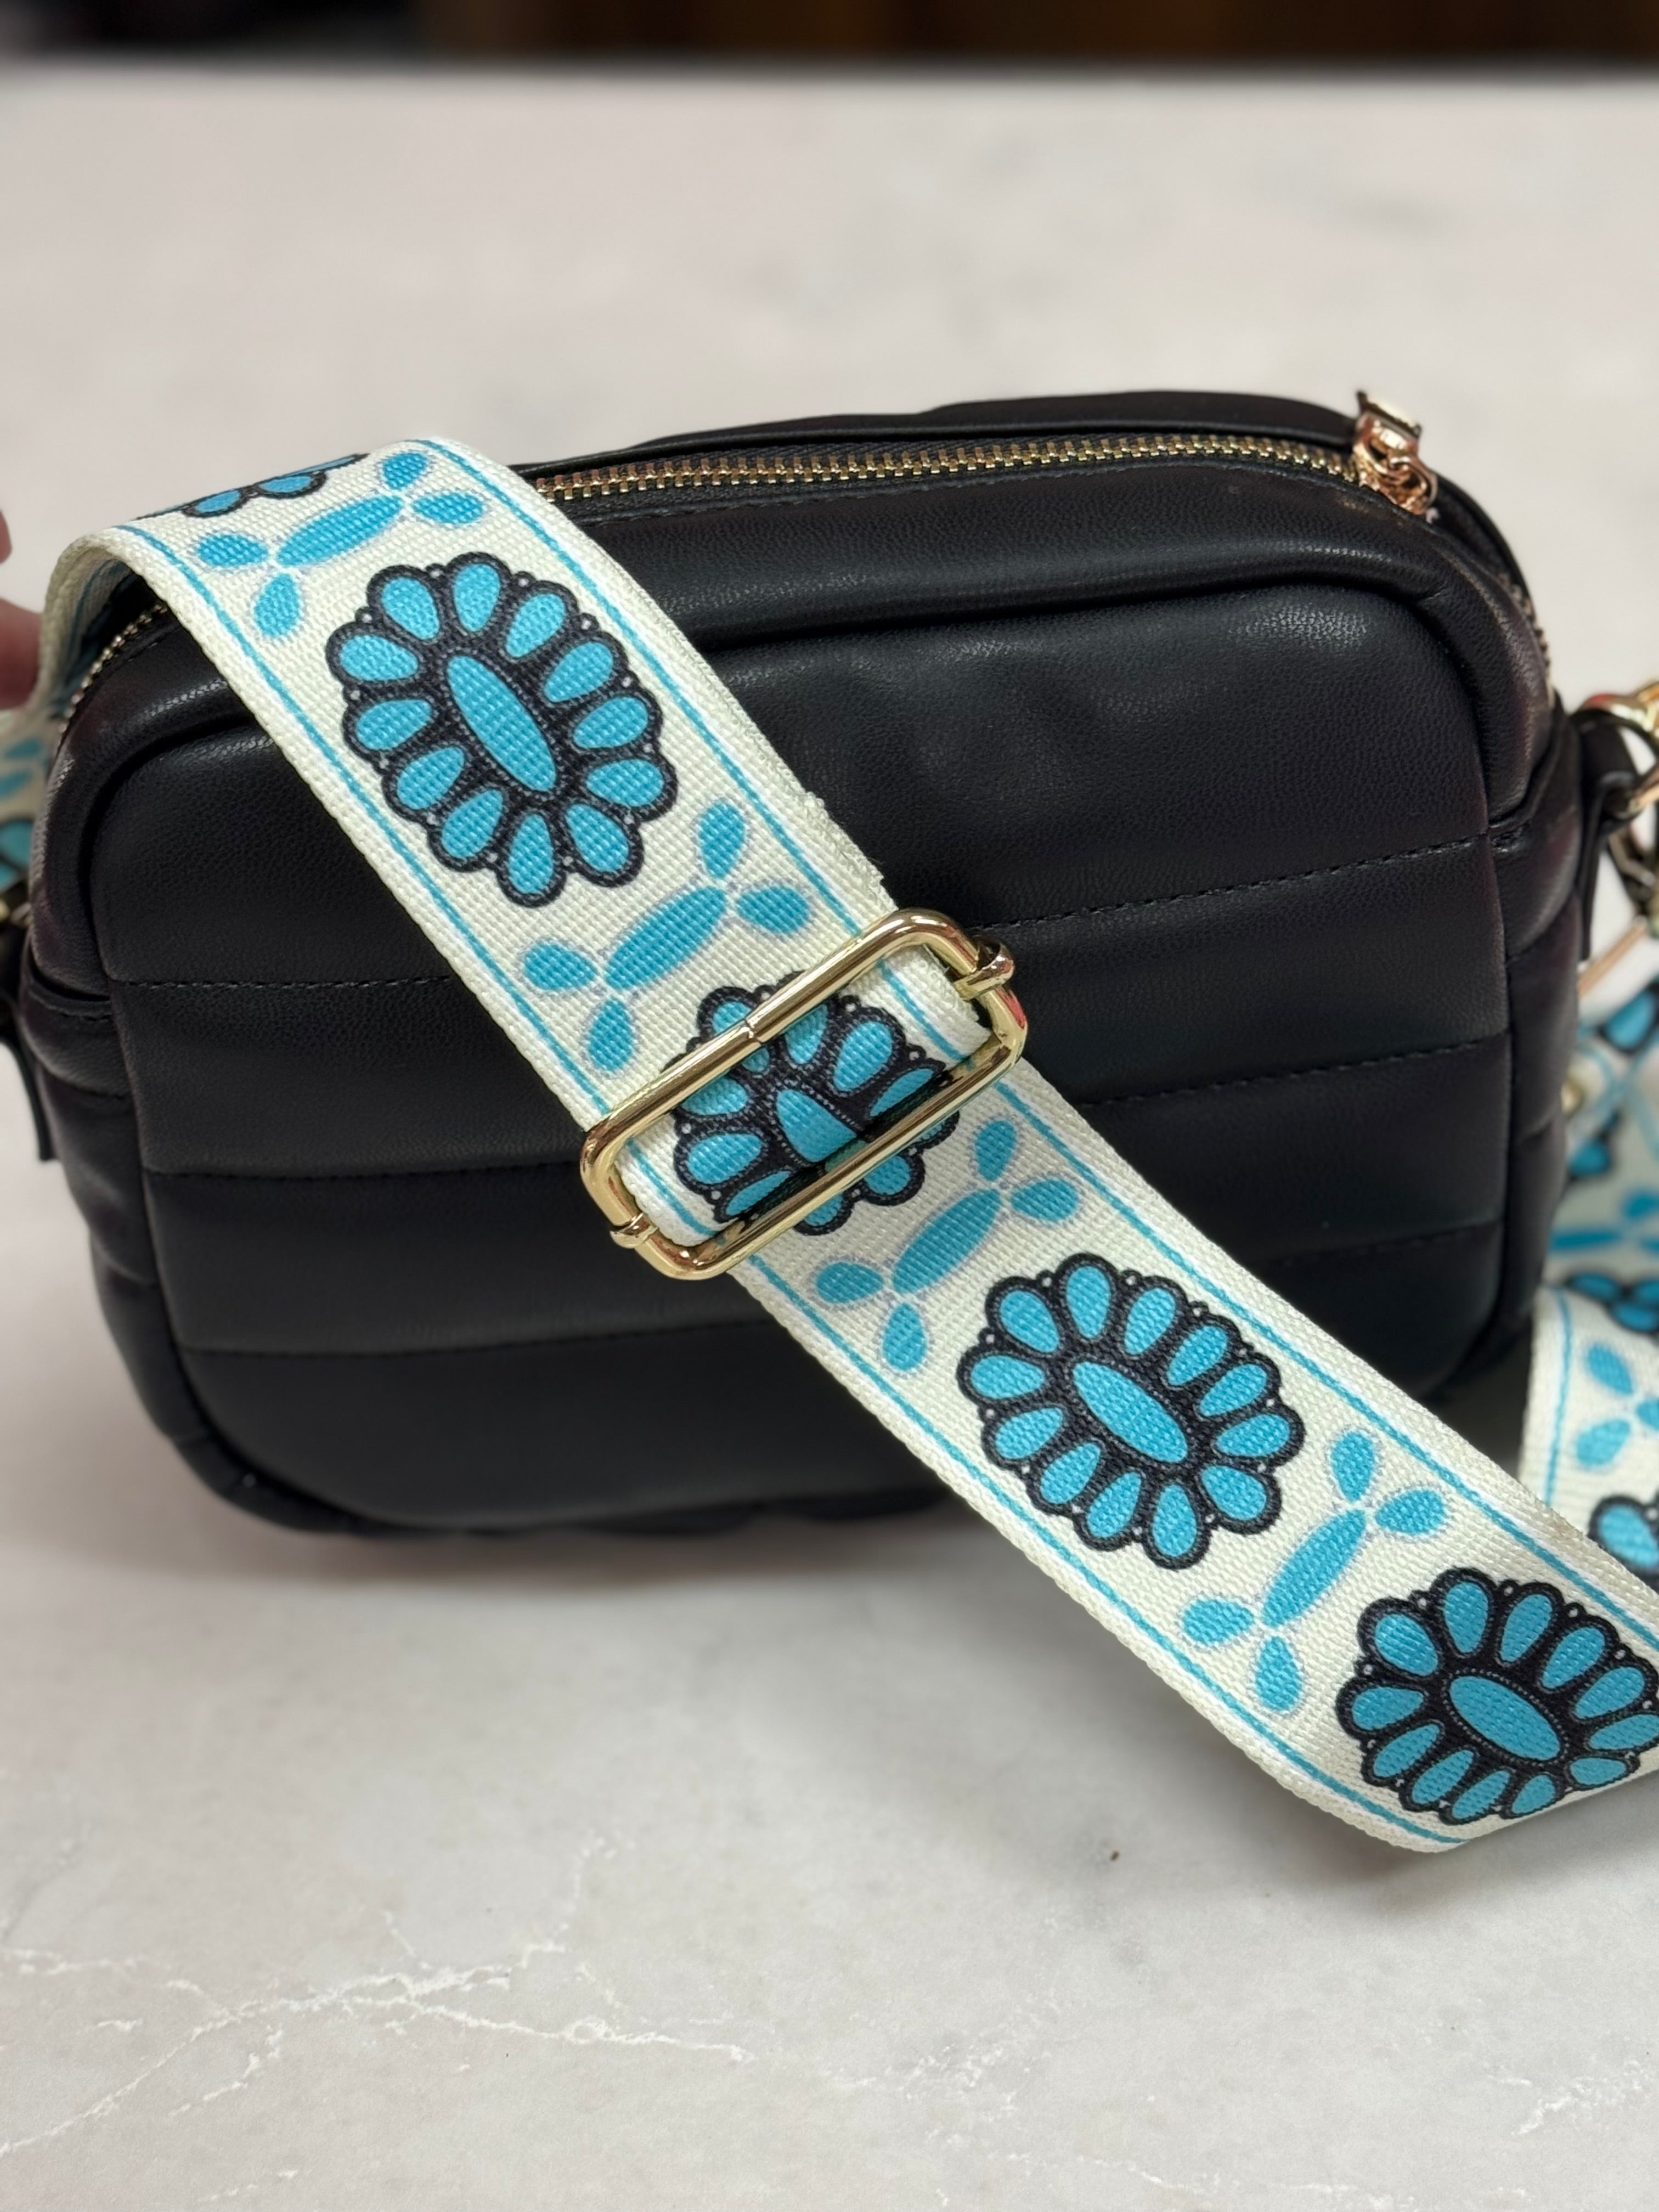 Squash Blossom Turquoise Strap and Bag